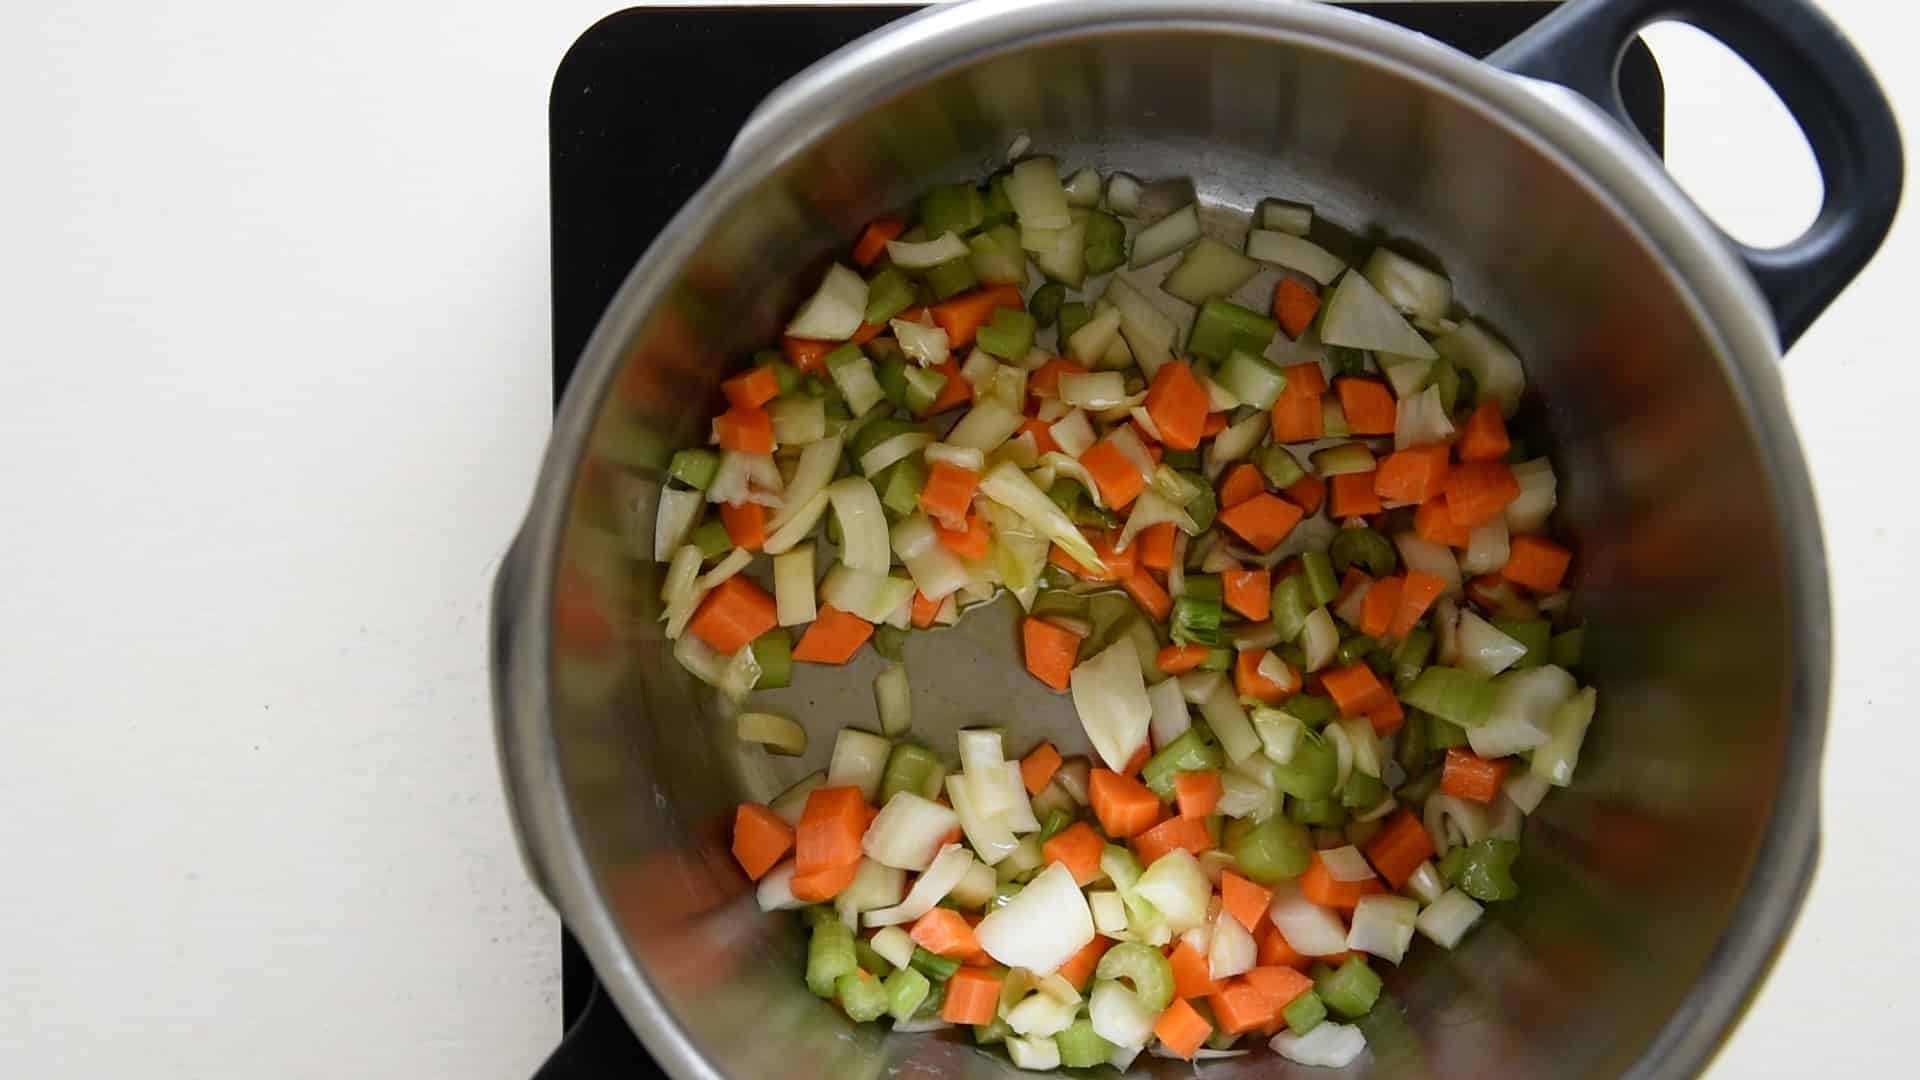 stir frying onion, carrot and celery